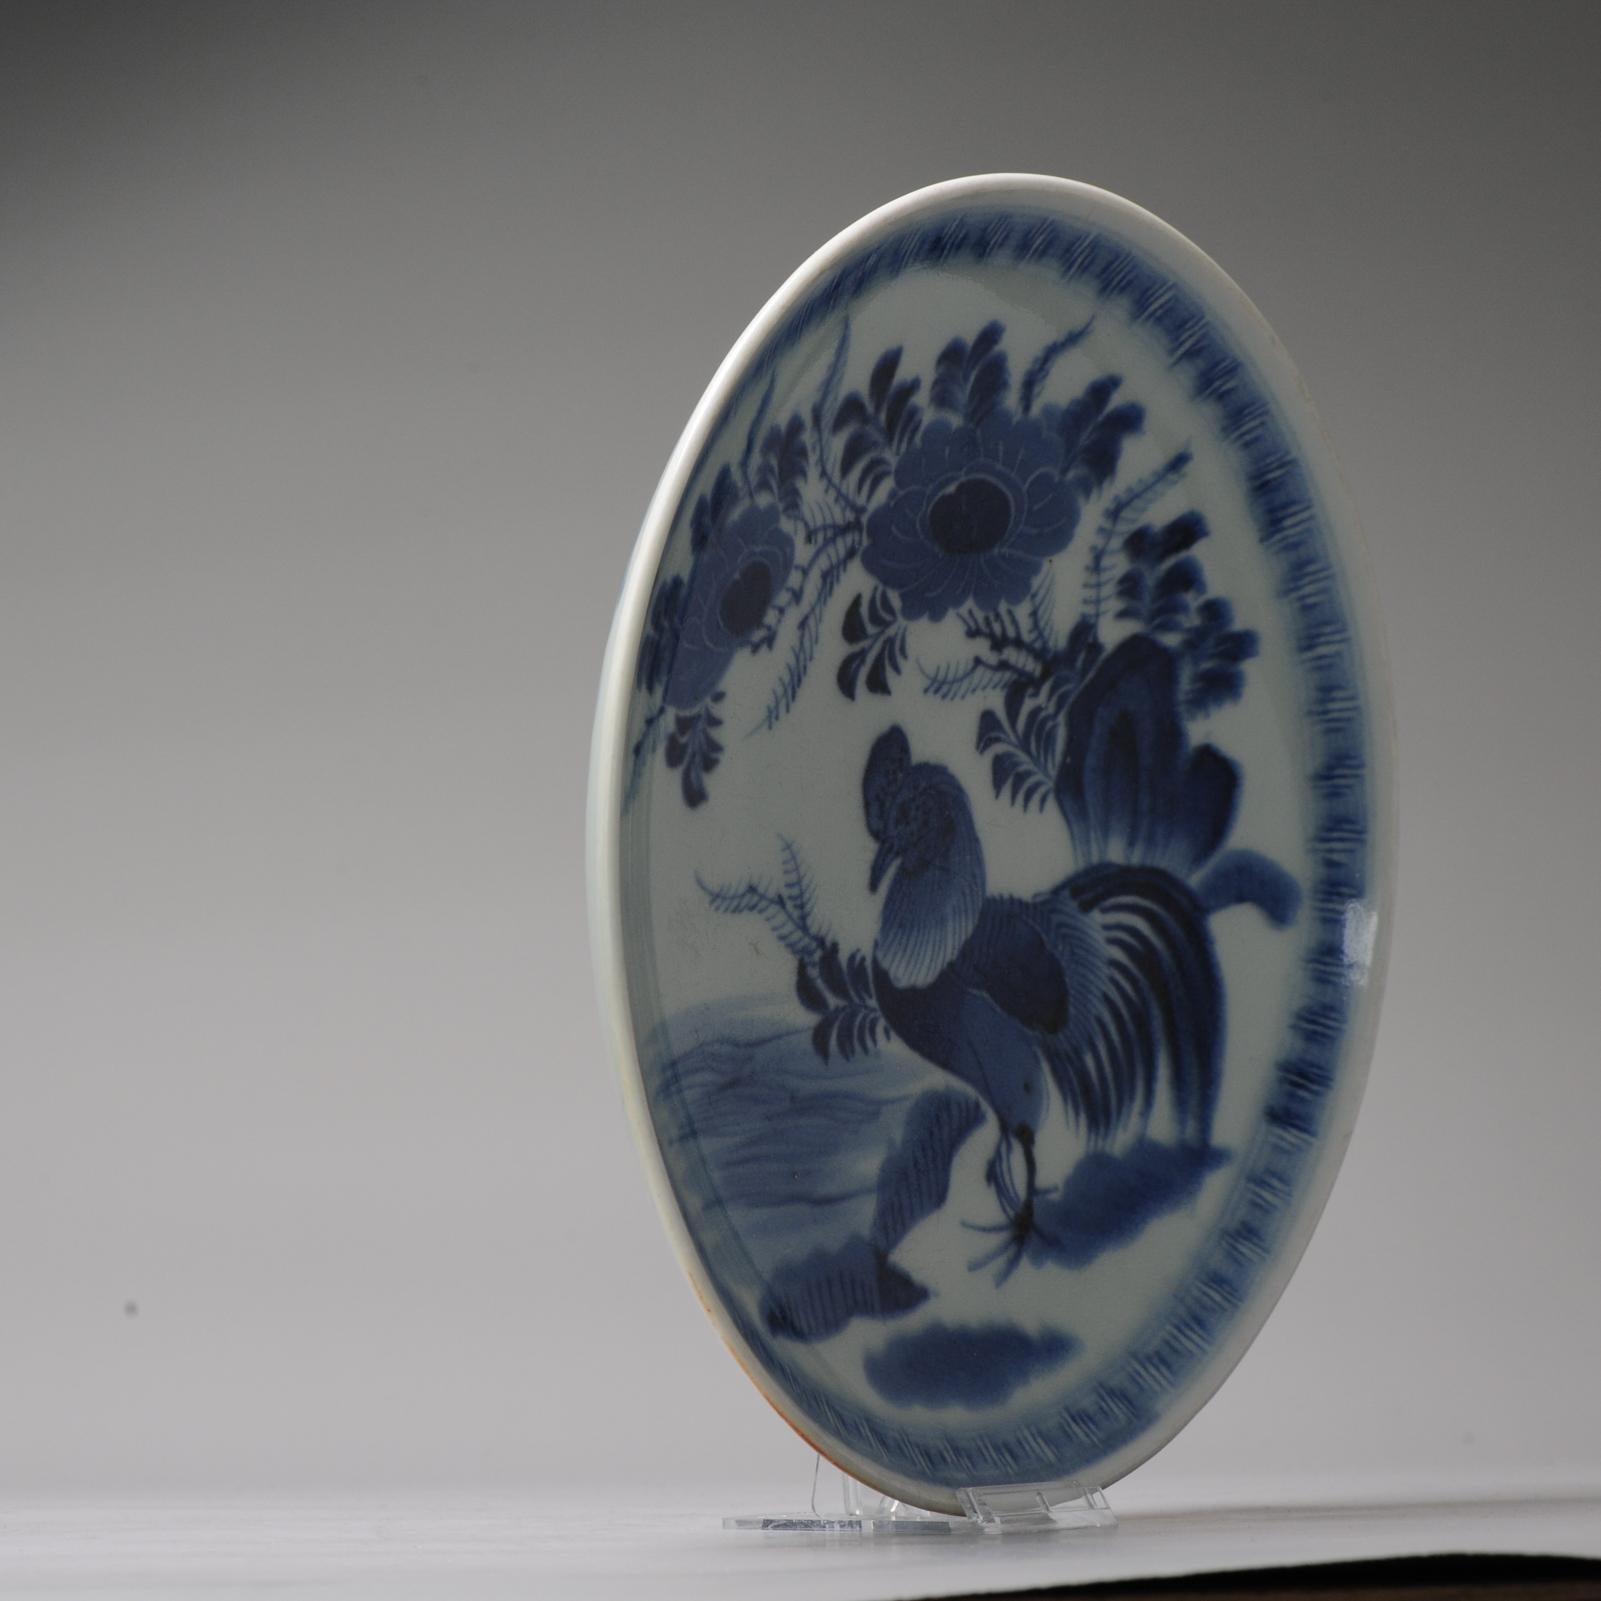 A very nice example of the mid Edo period.

Additional information:
Material: Porcelain & Pottery
Period: 17th century, 18th century 
Age: Pre-1800 
Original/Reproduction: Original
Condition: Perfect
Dimension: Ø 27.6 x 4.1 H cm